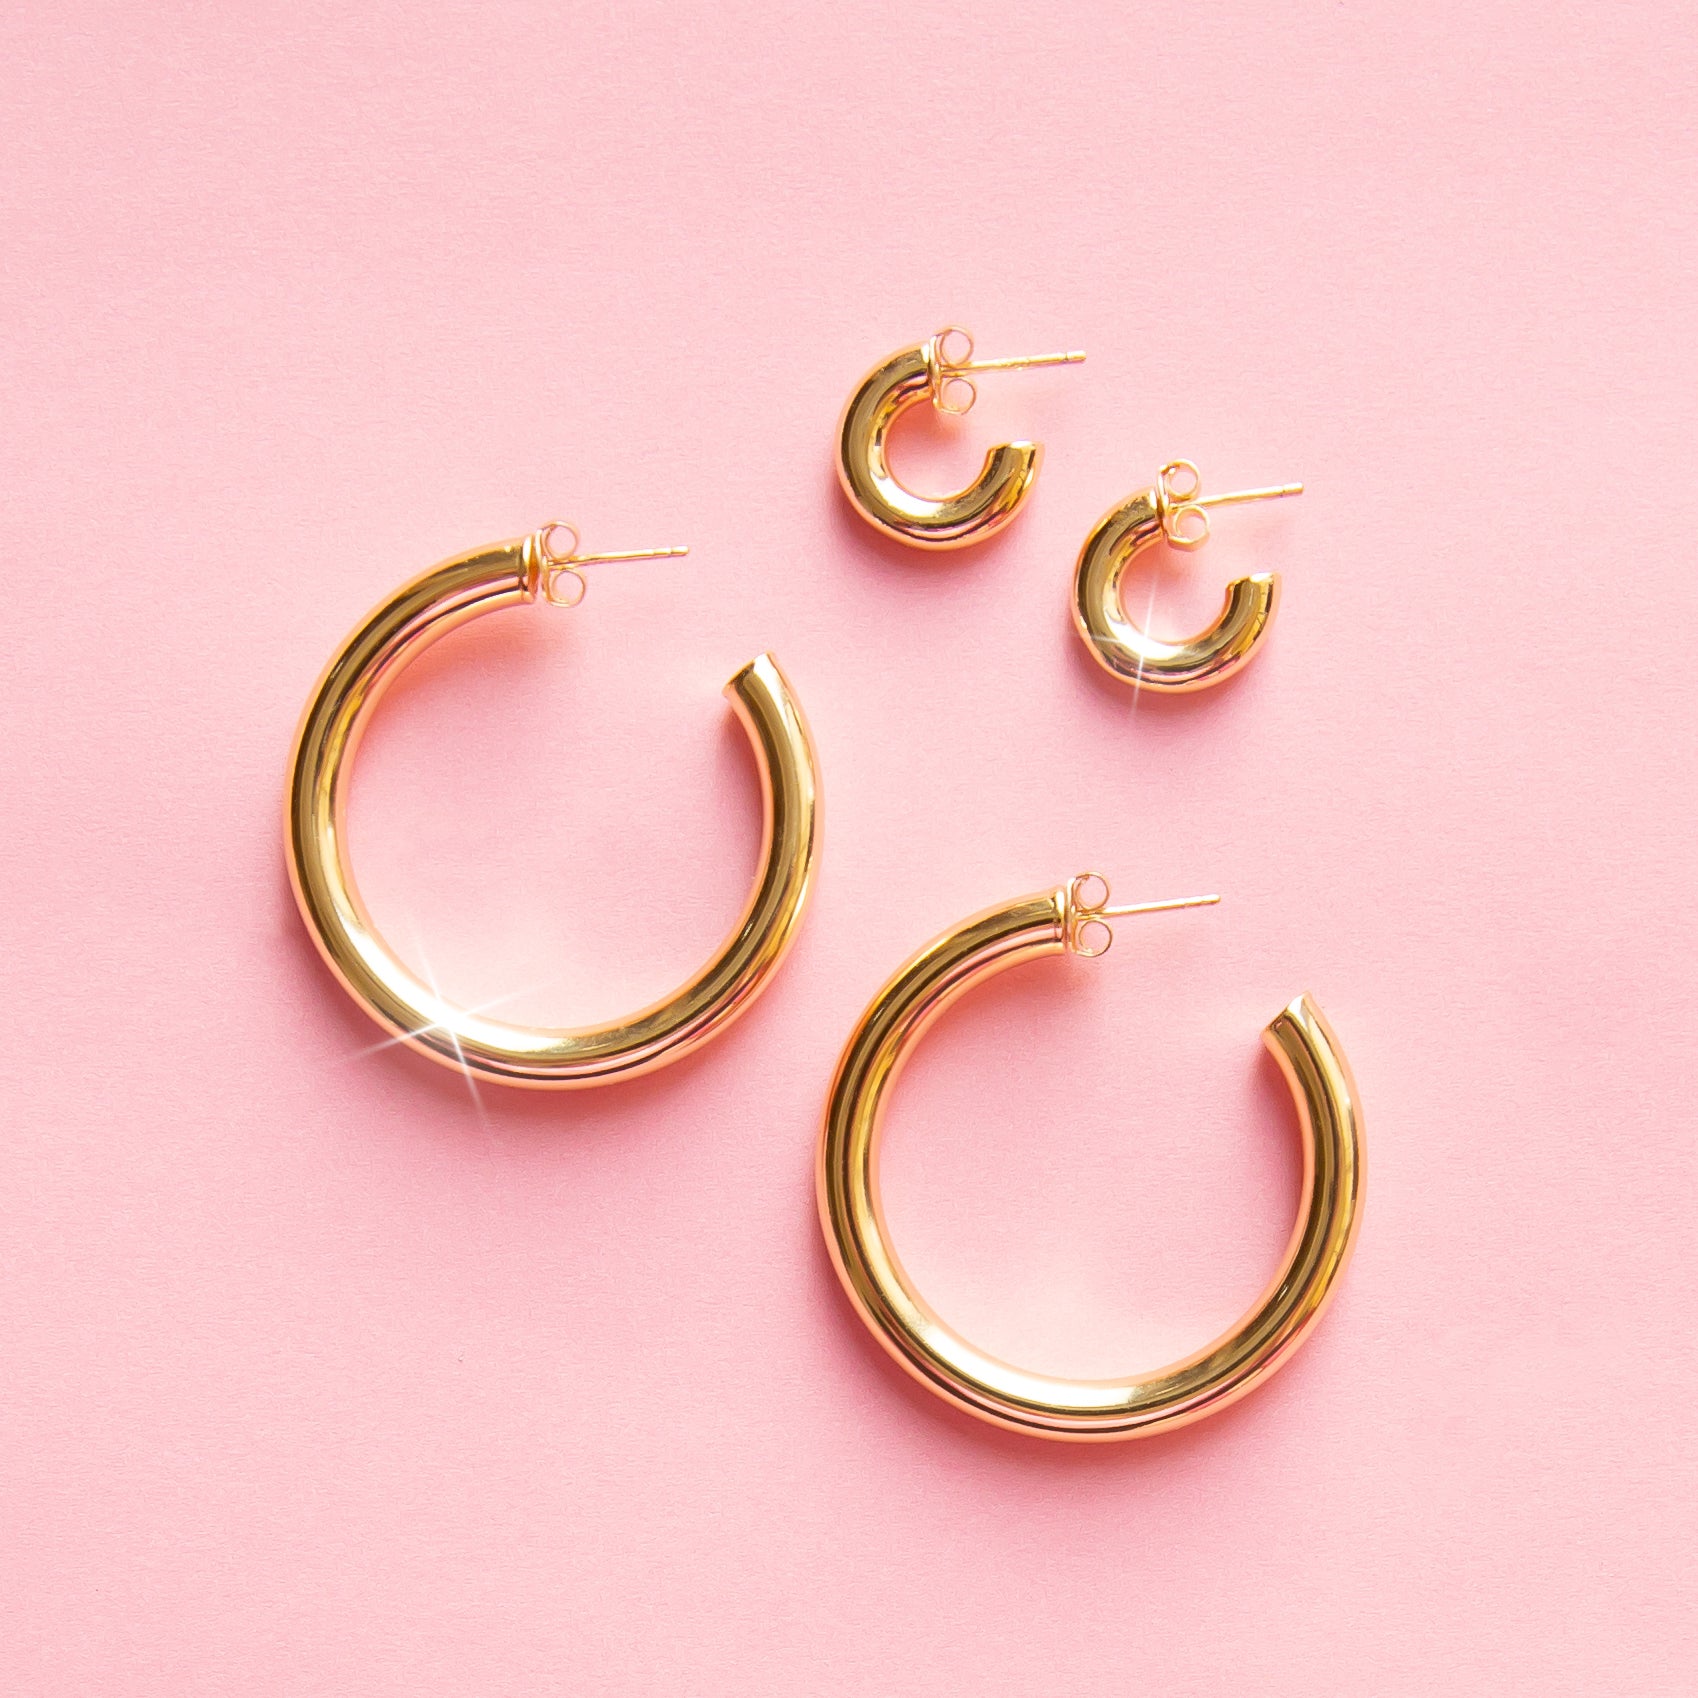 On a pink background is a three different sized pairs of chunky gold hoop earrings with a straight post backing. Each pair sold separately. 